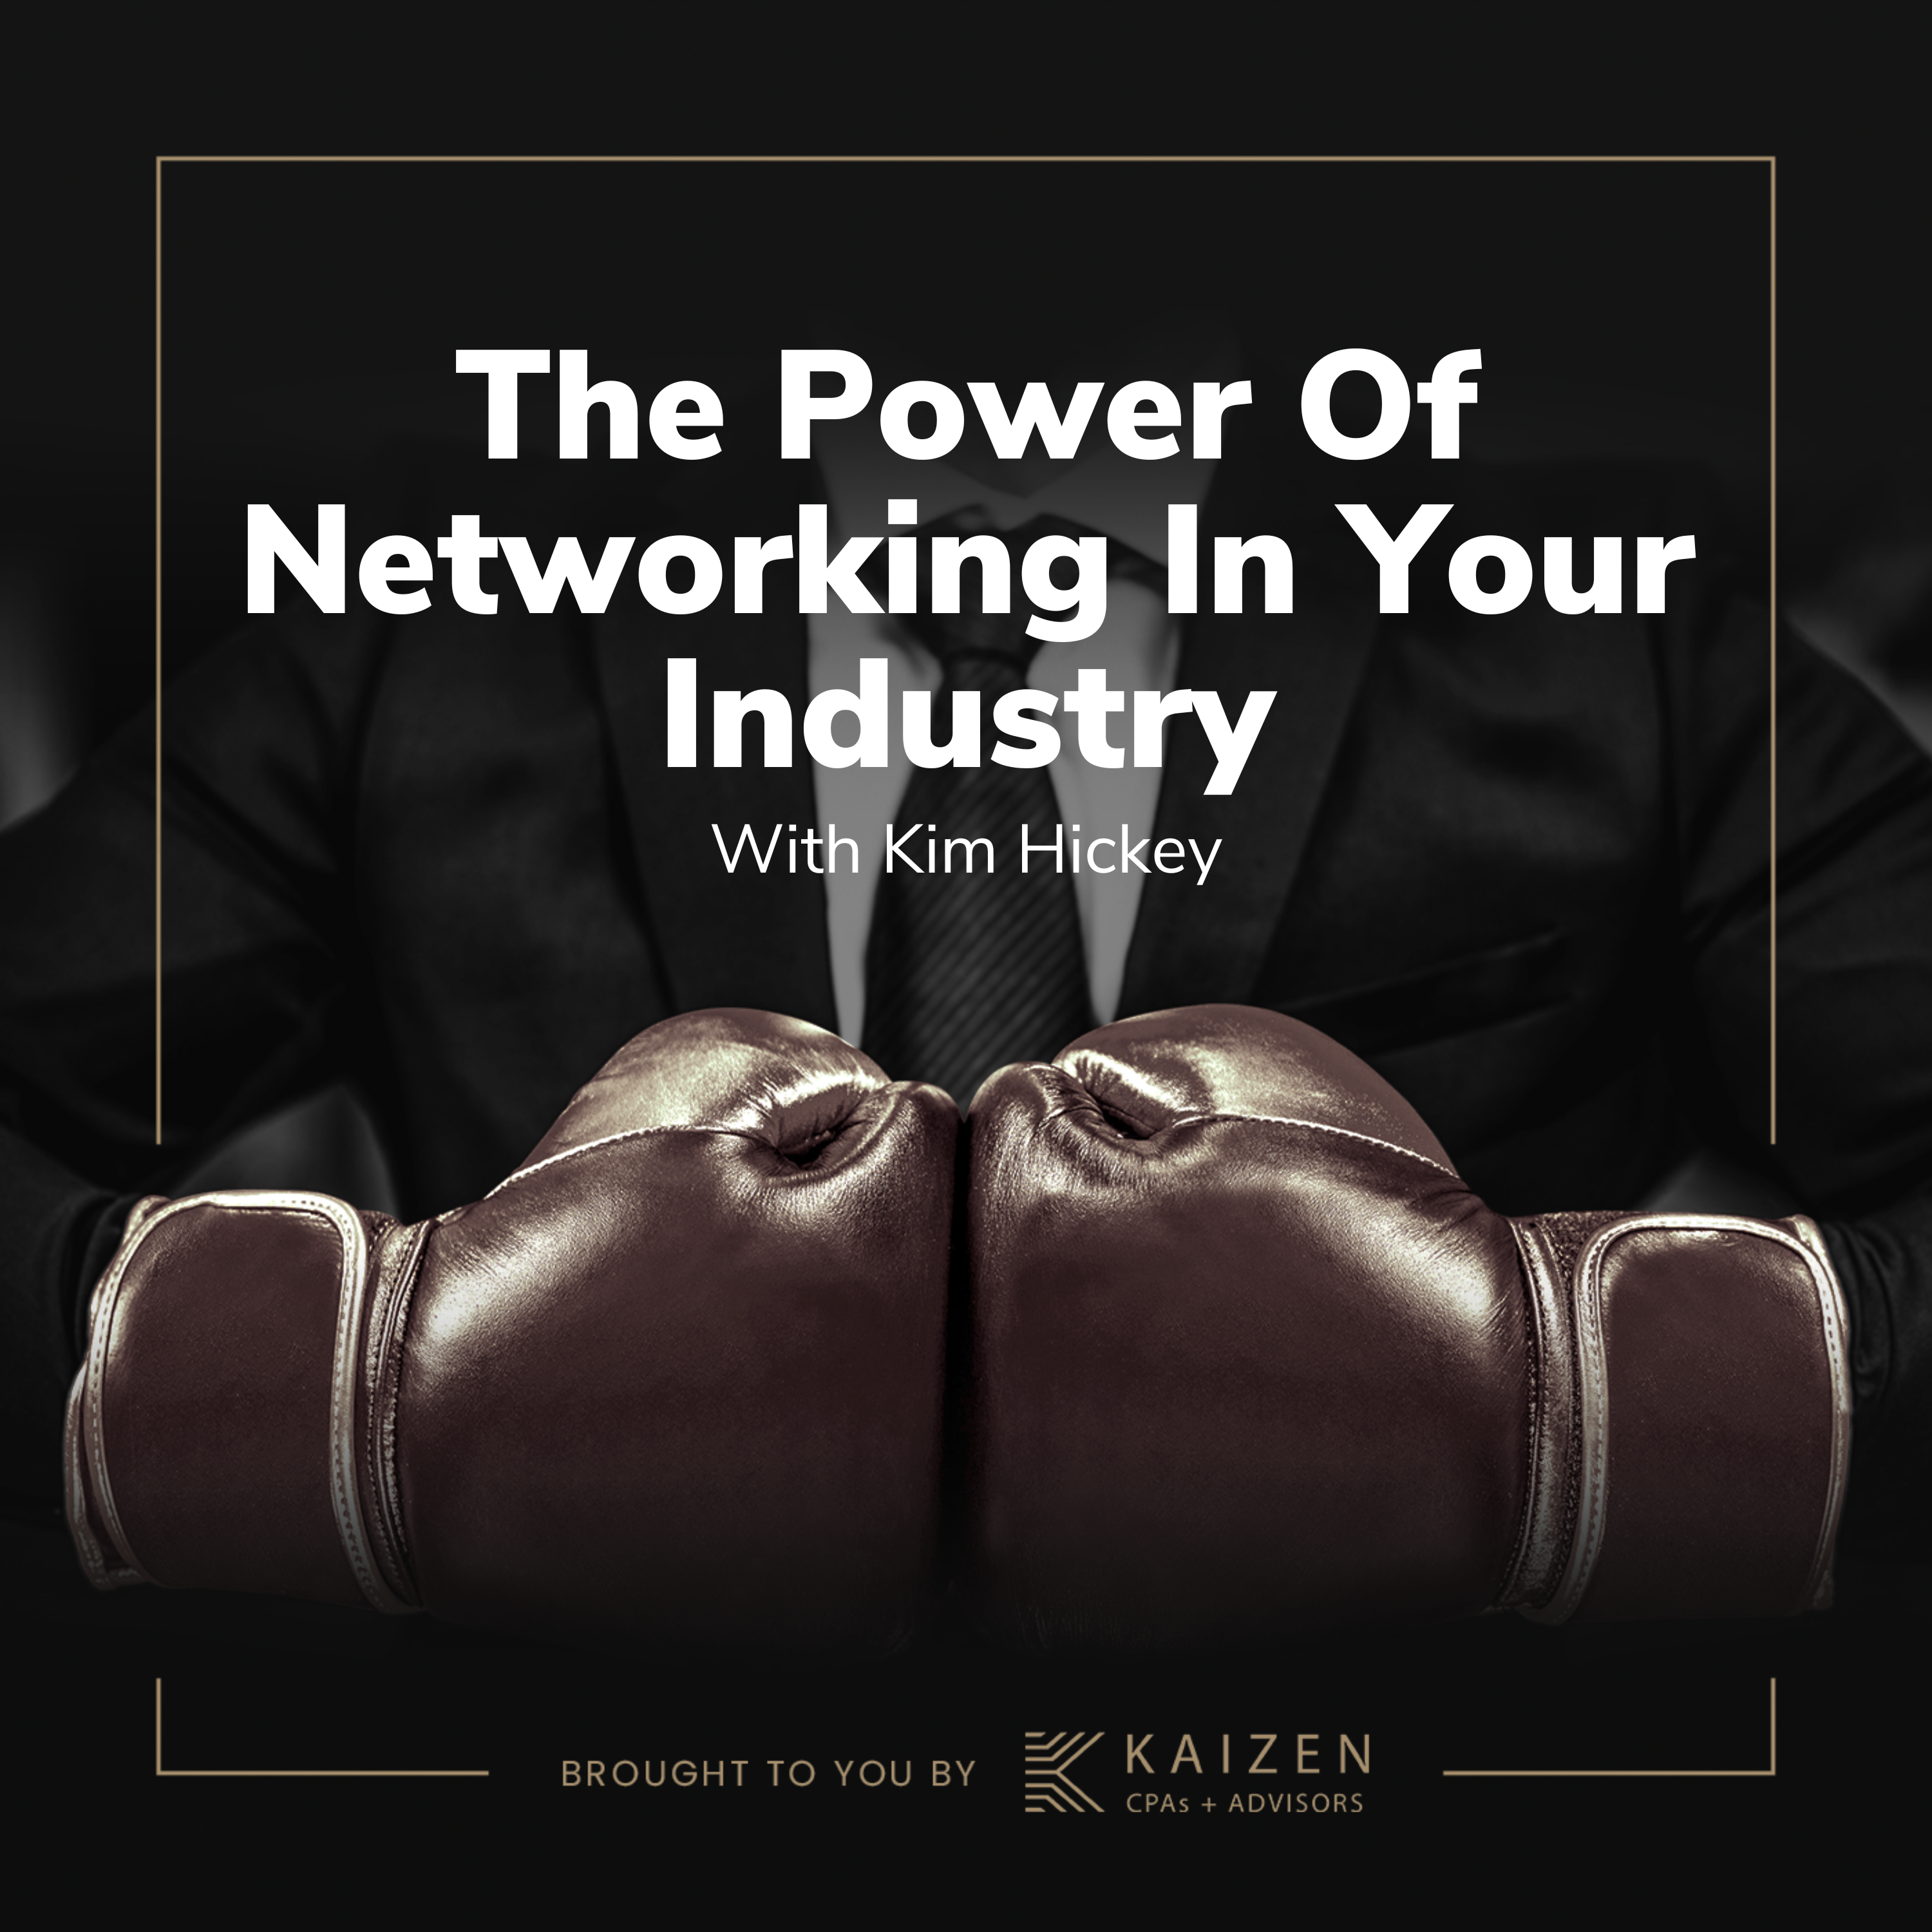 The power of networking in your industry